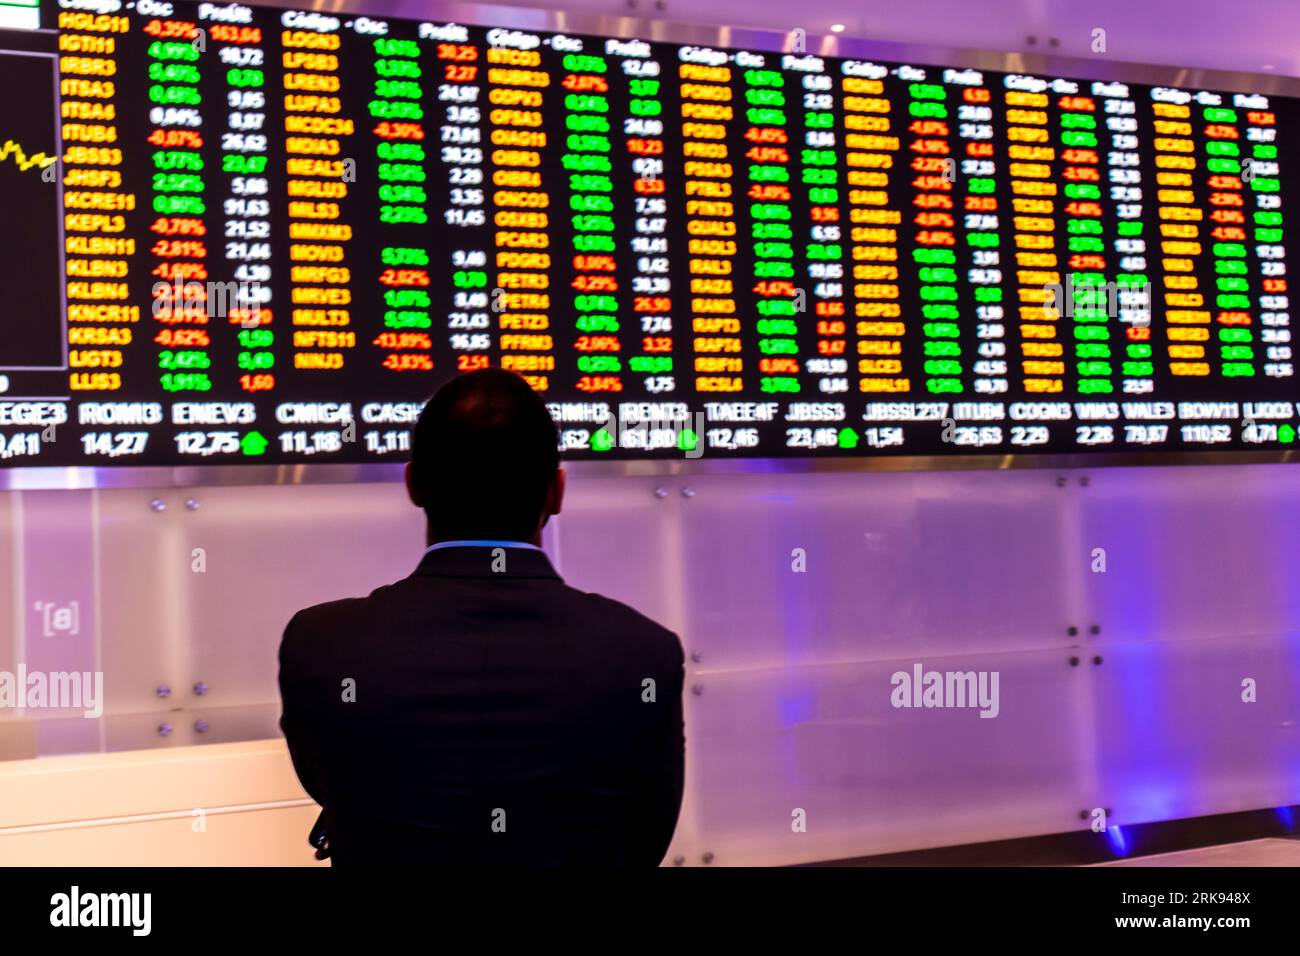 Sao Paulo, Brazil, November 22, 2022. Display with stock quotes in the modern visitor center of B3, Brasil, Bolsa, Balcao, in the headquarters of BOVESPA, Sao Paulo Stock Exchange, in downtown city Stock Photo